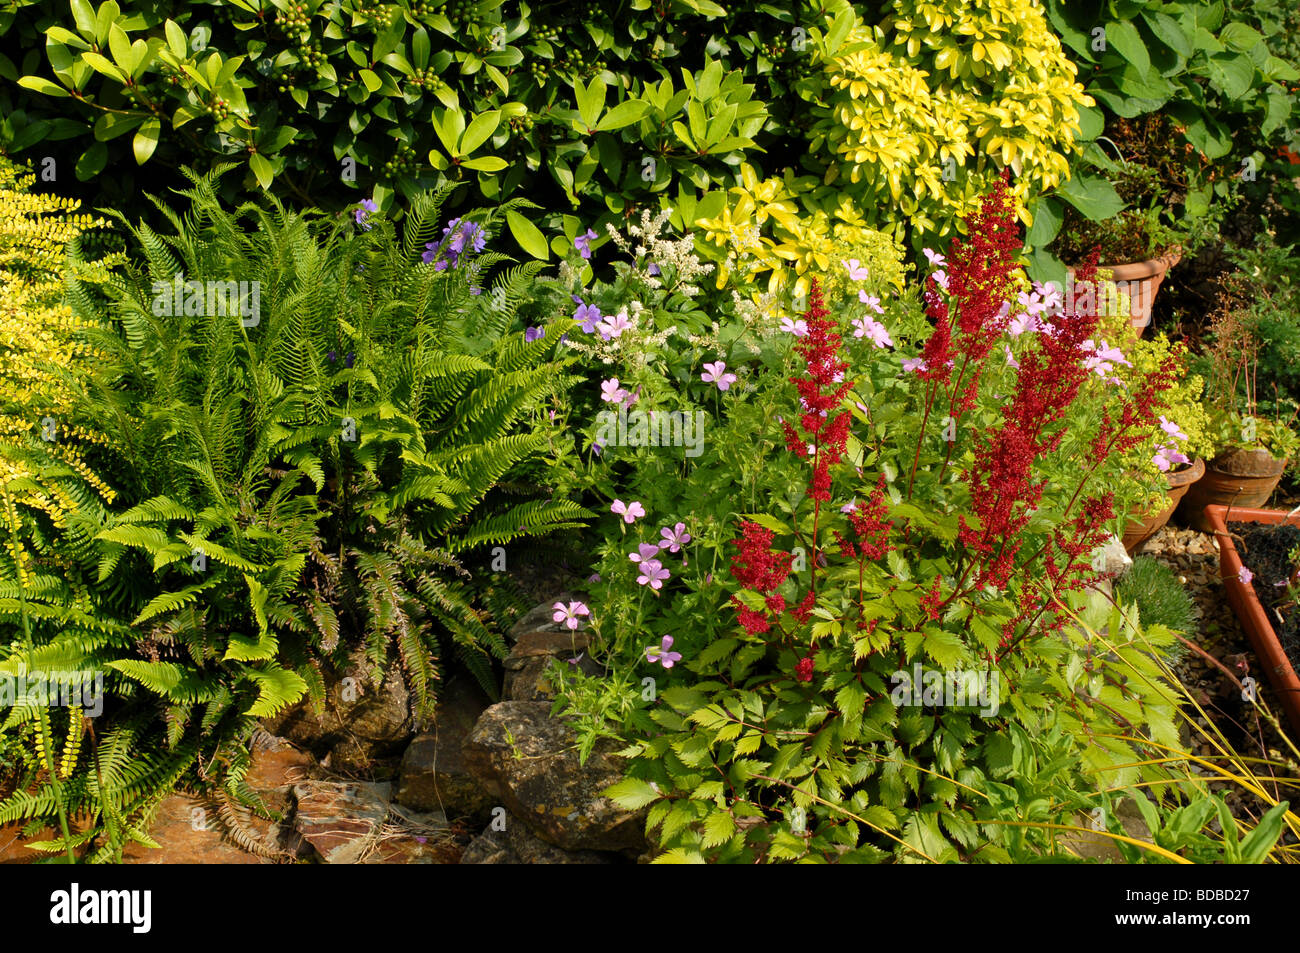 Country cottage garden border with Astilbe Fern Cranesbill Geranium Skimma and Choisya all fighting for space amongst the rocks Stock Photo